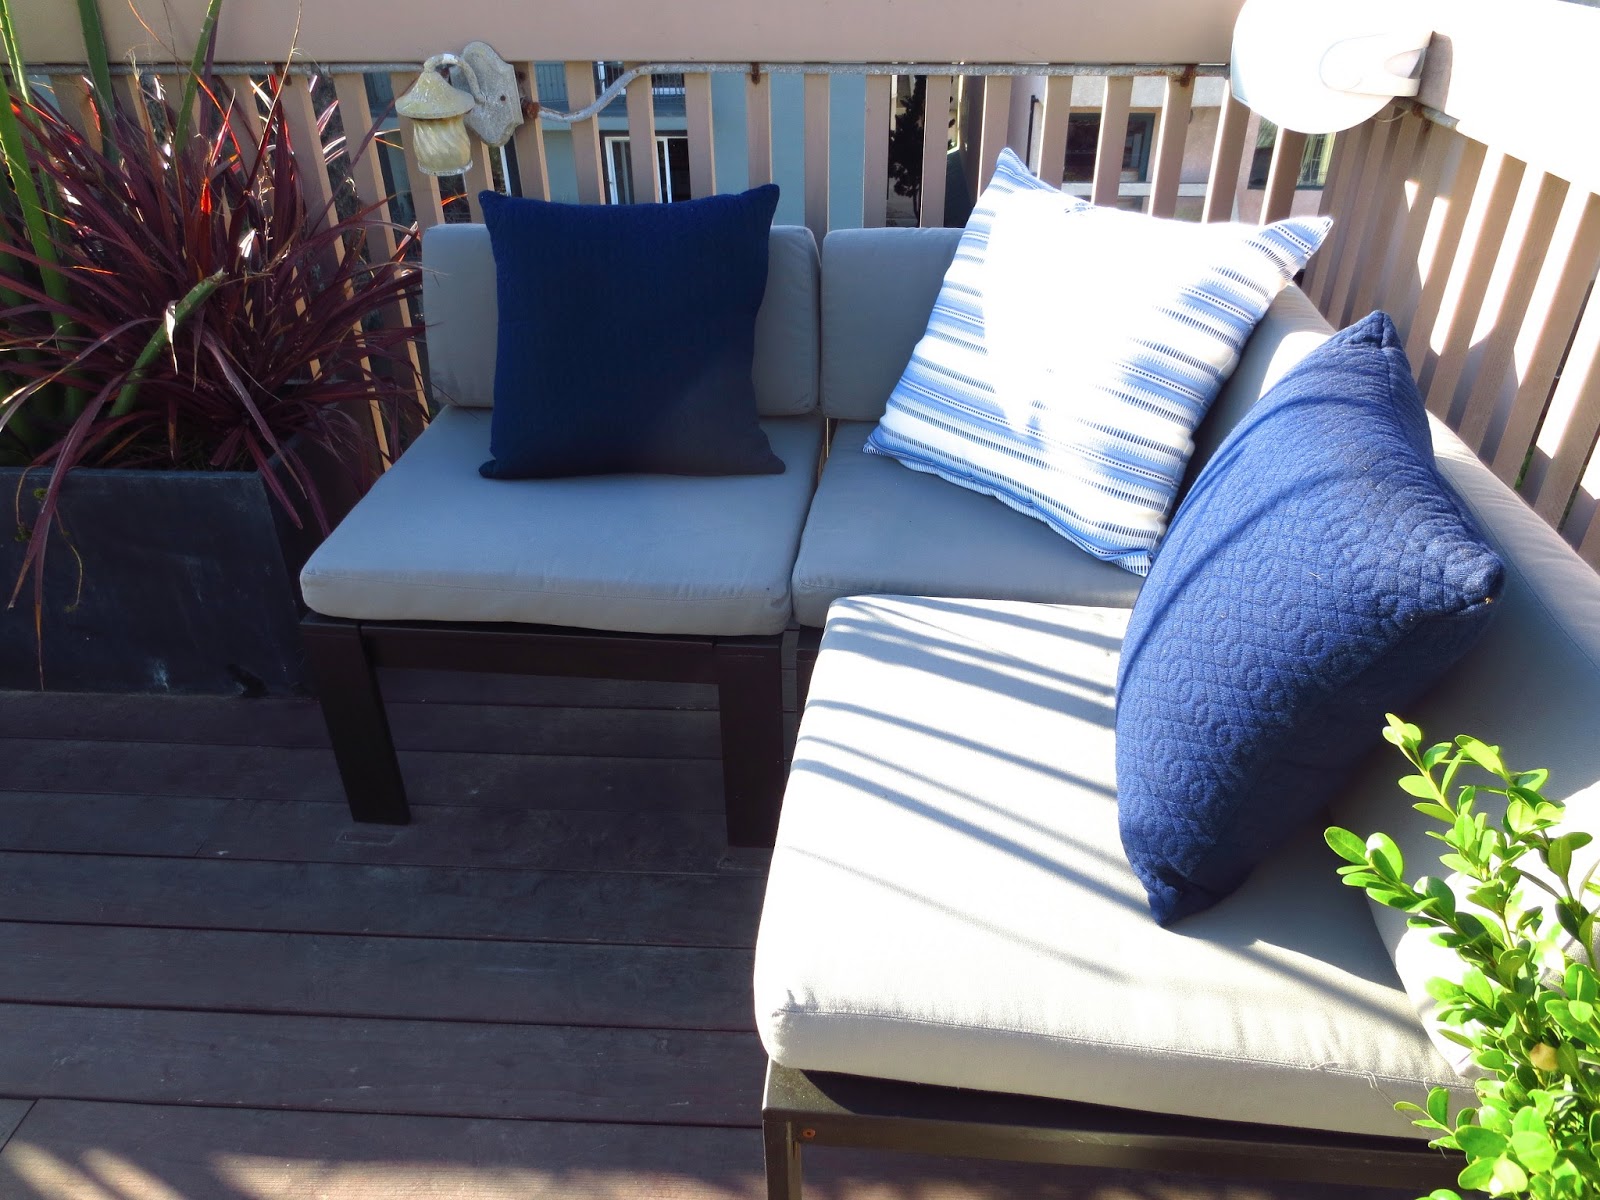 COCOCOZY: OCEAN VIEW OUTDOOR LIVING ROOM IN THE MDR!